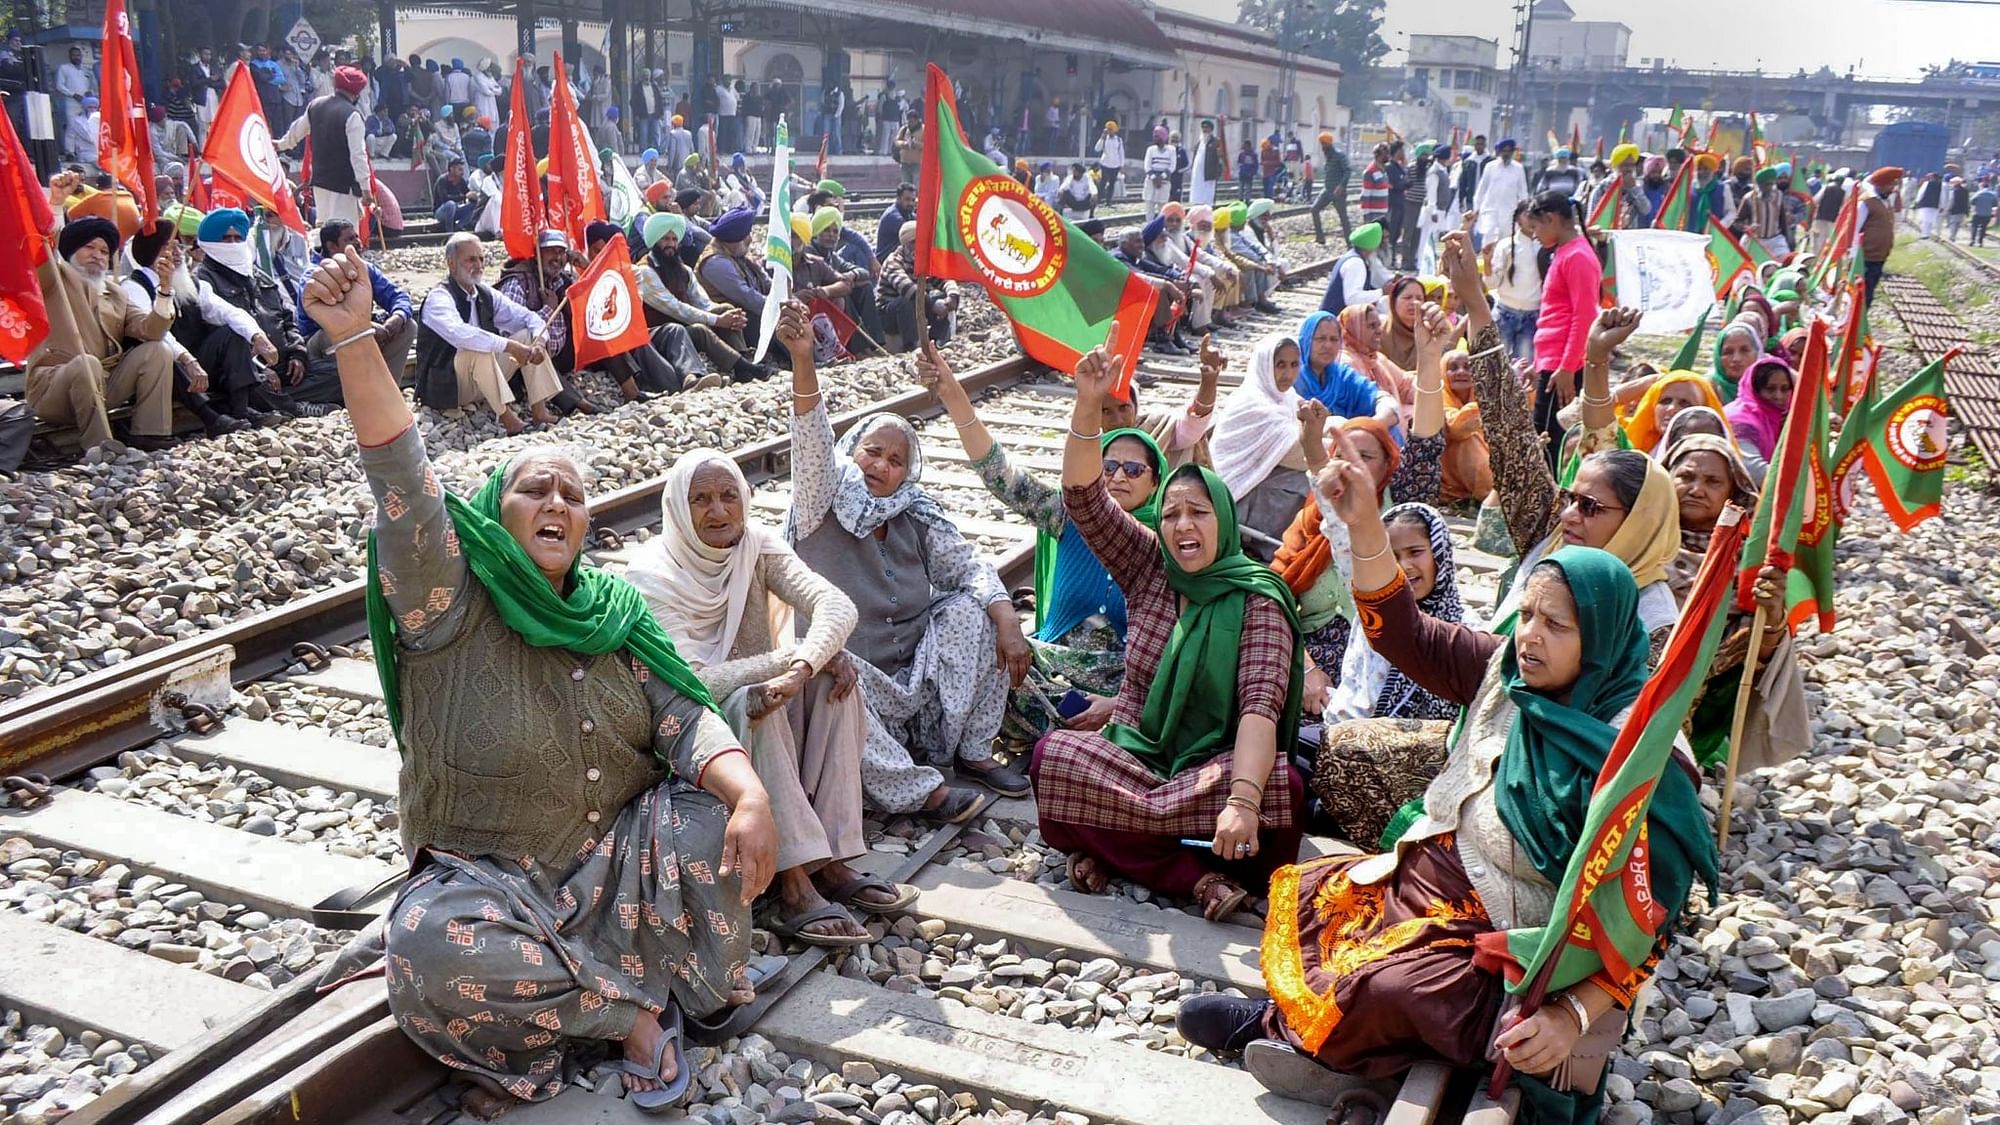 Members of various farmer organisations block a railway track in Patiala during a four-hour rail roko demonstration across the country, called by Samyukta Kisan Morcha (SKM), as part of their agitation against Centre’s farm reform laws.